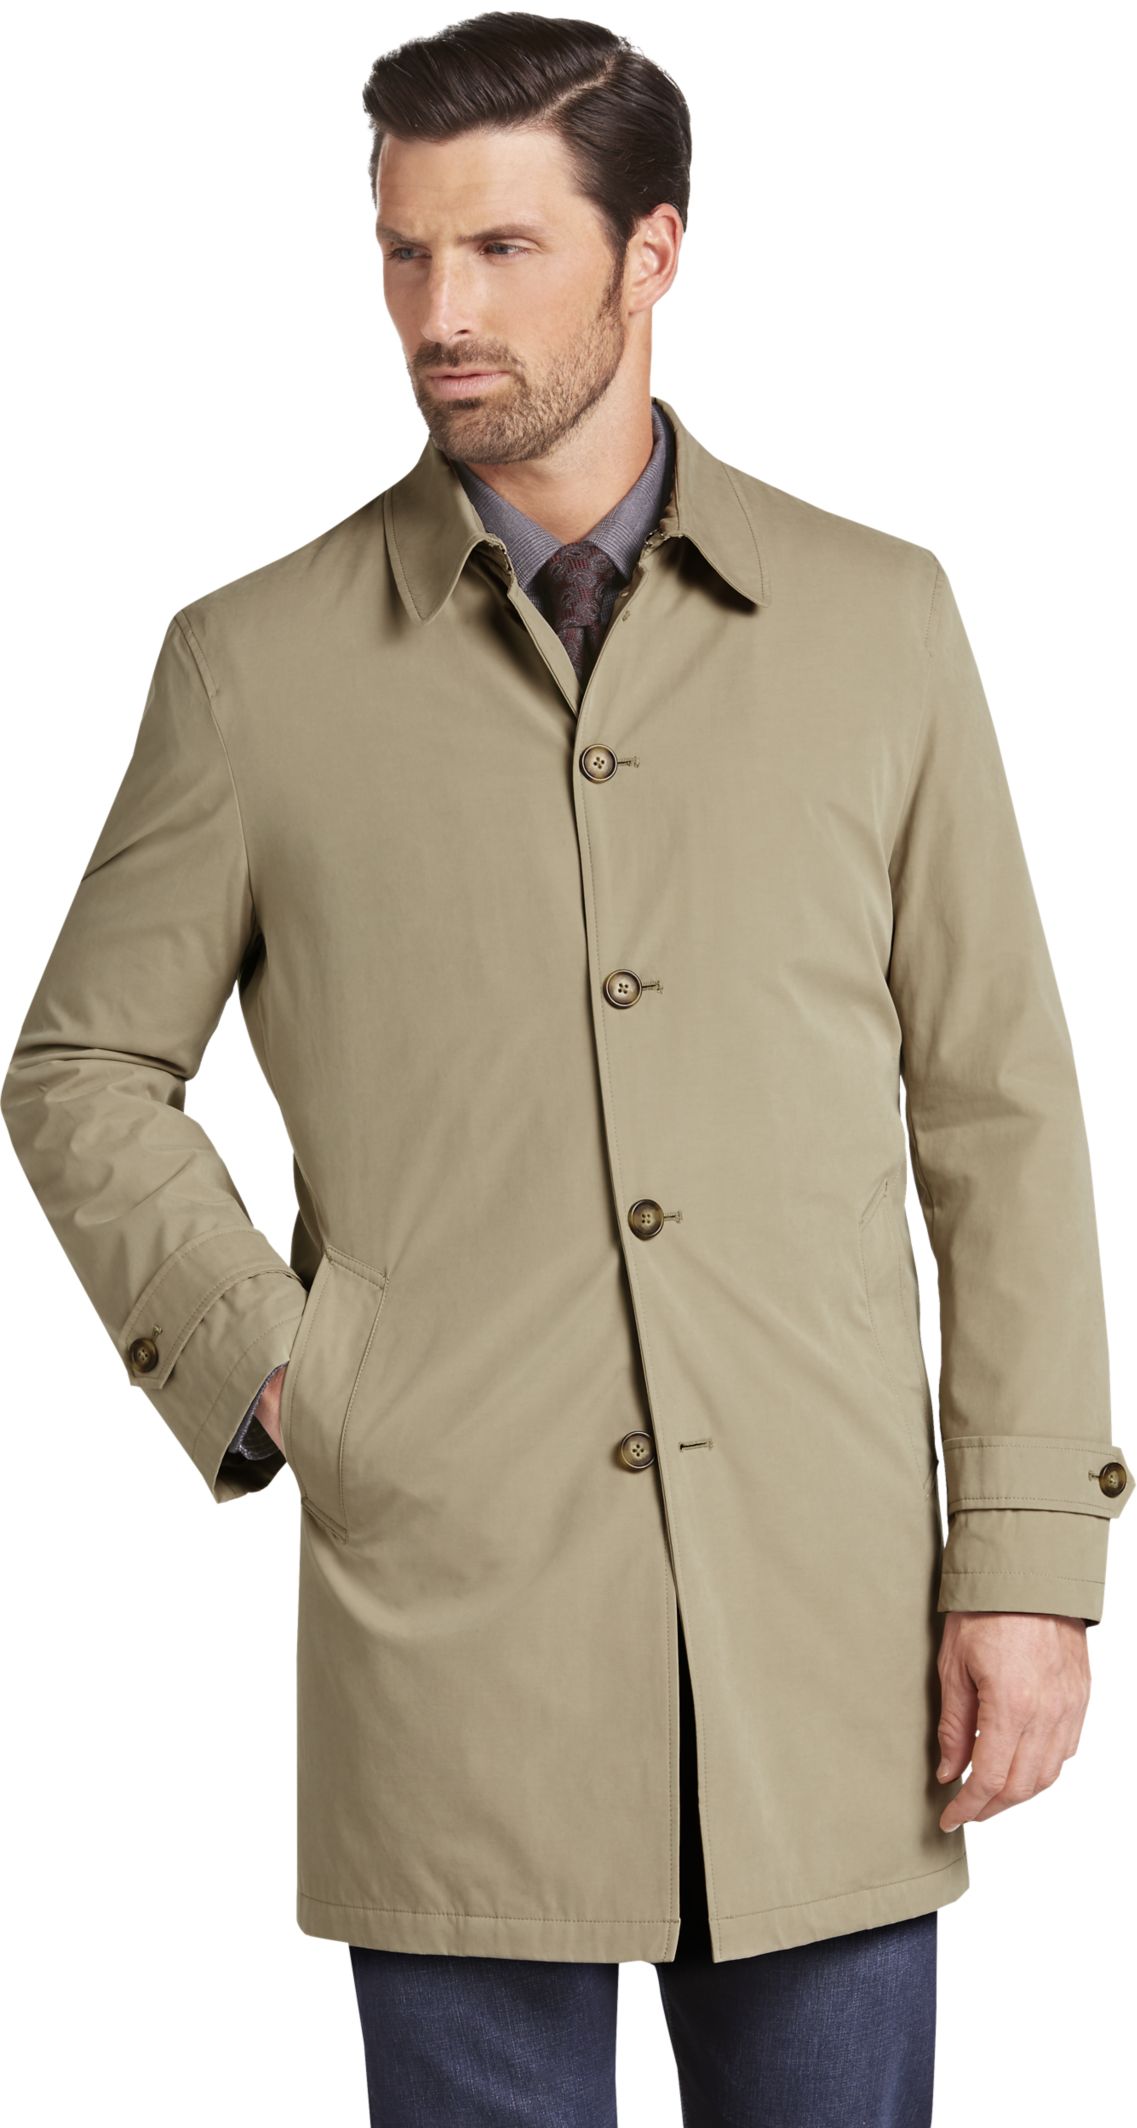 Raincoats for men: Need of This monsoon